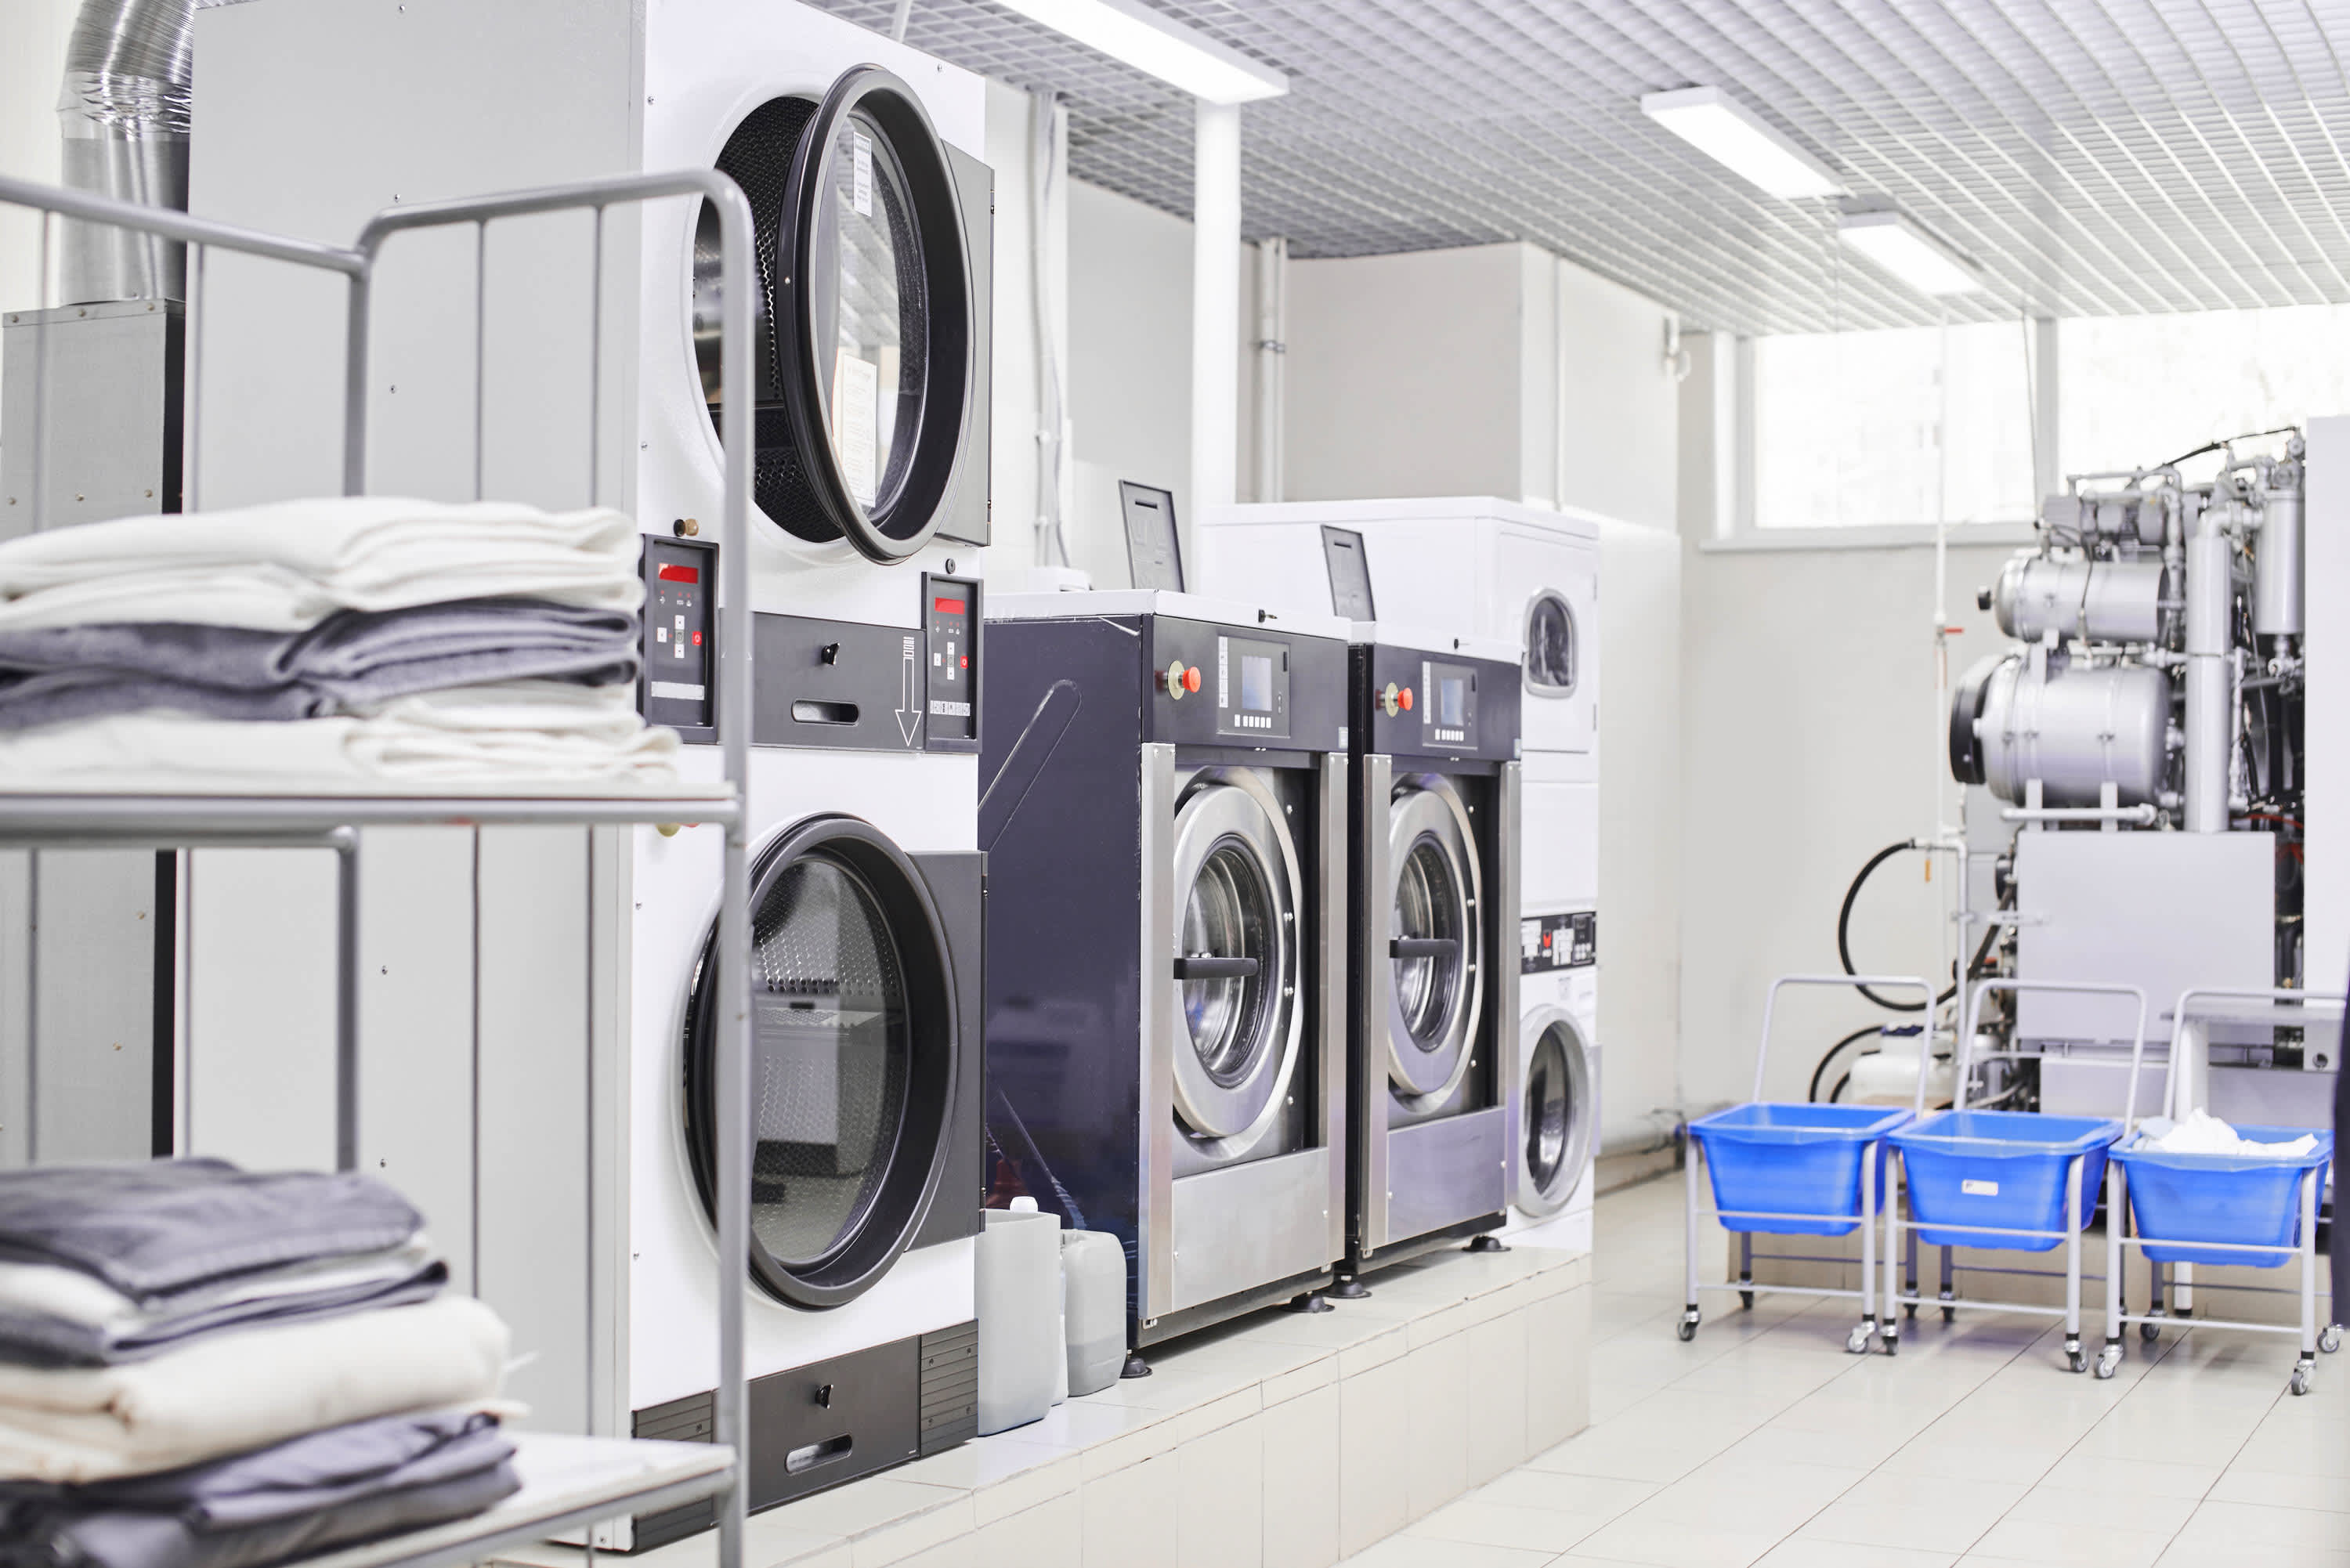 What Is Dry Cleaning? - How the Dry Cleaning Process Works